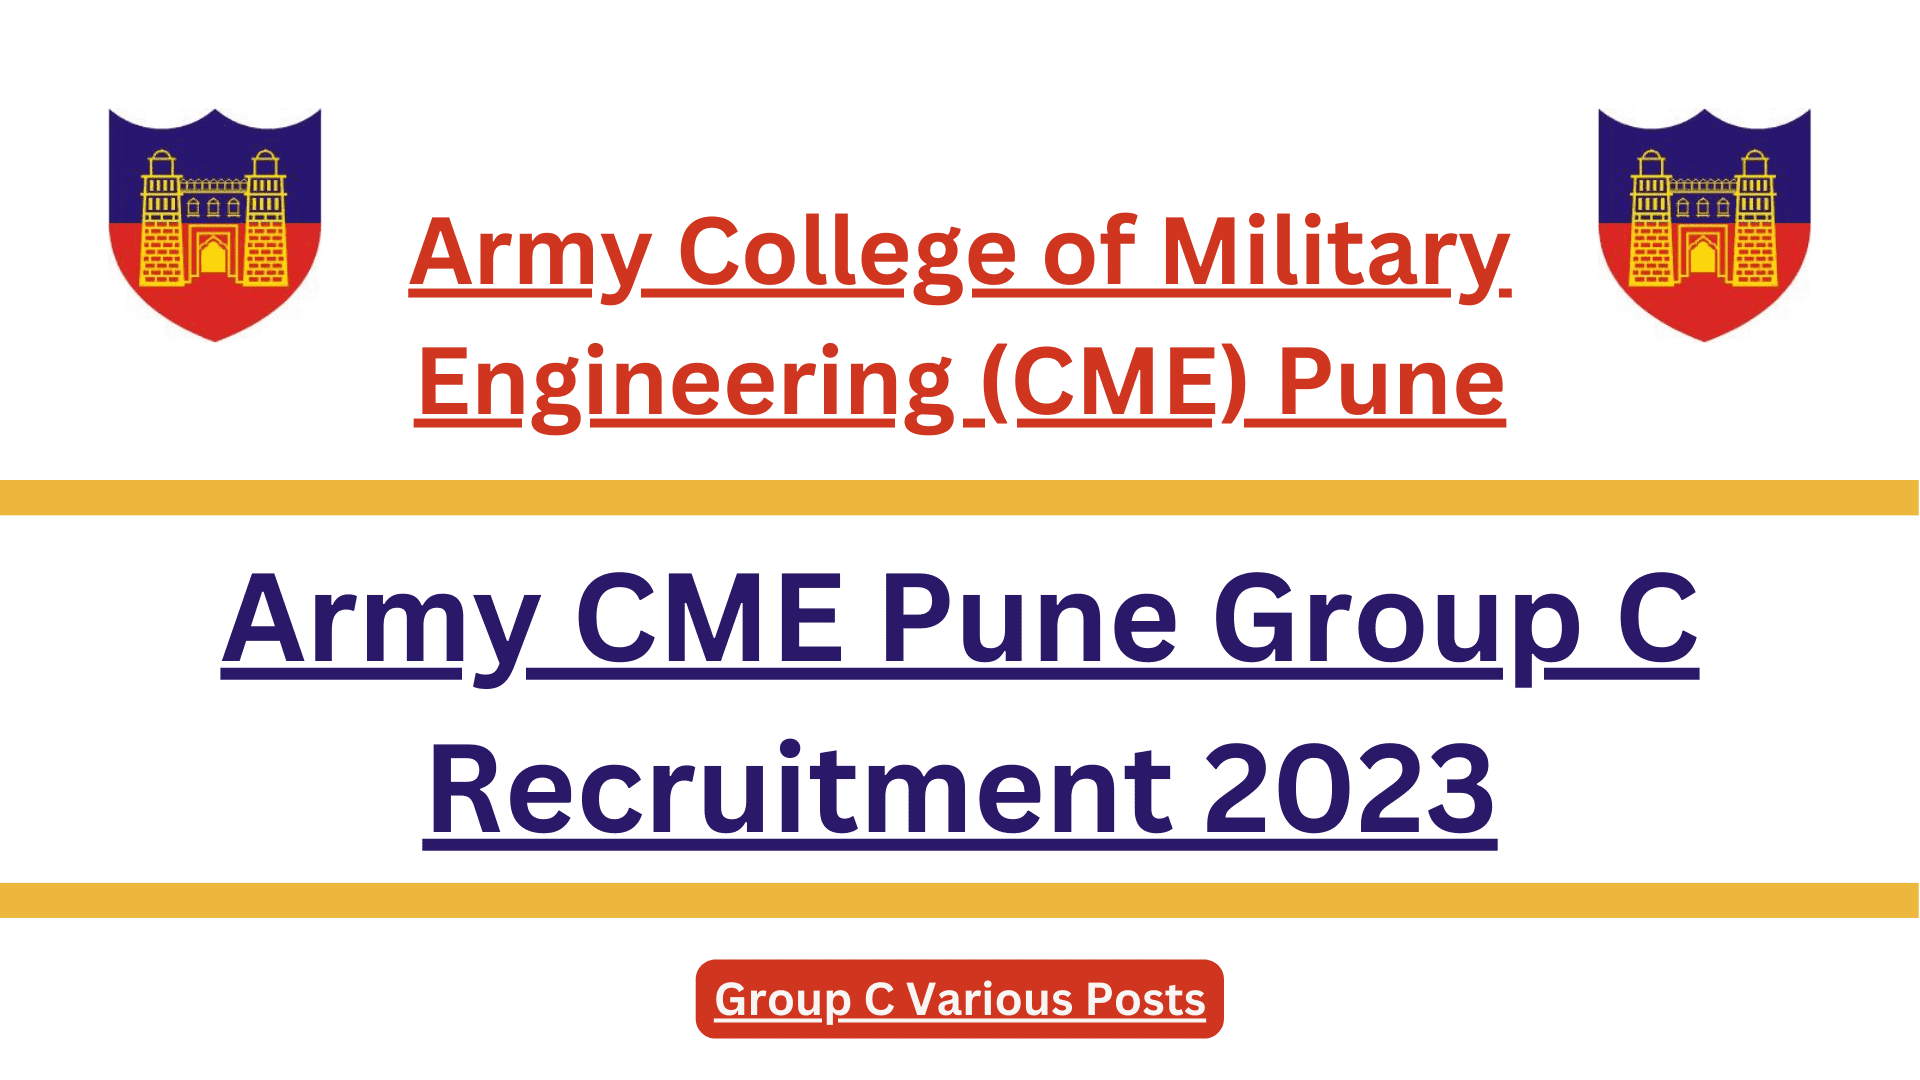 Army CME Pune Group C Recruitment 2023